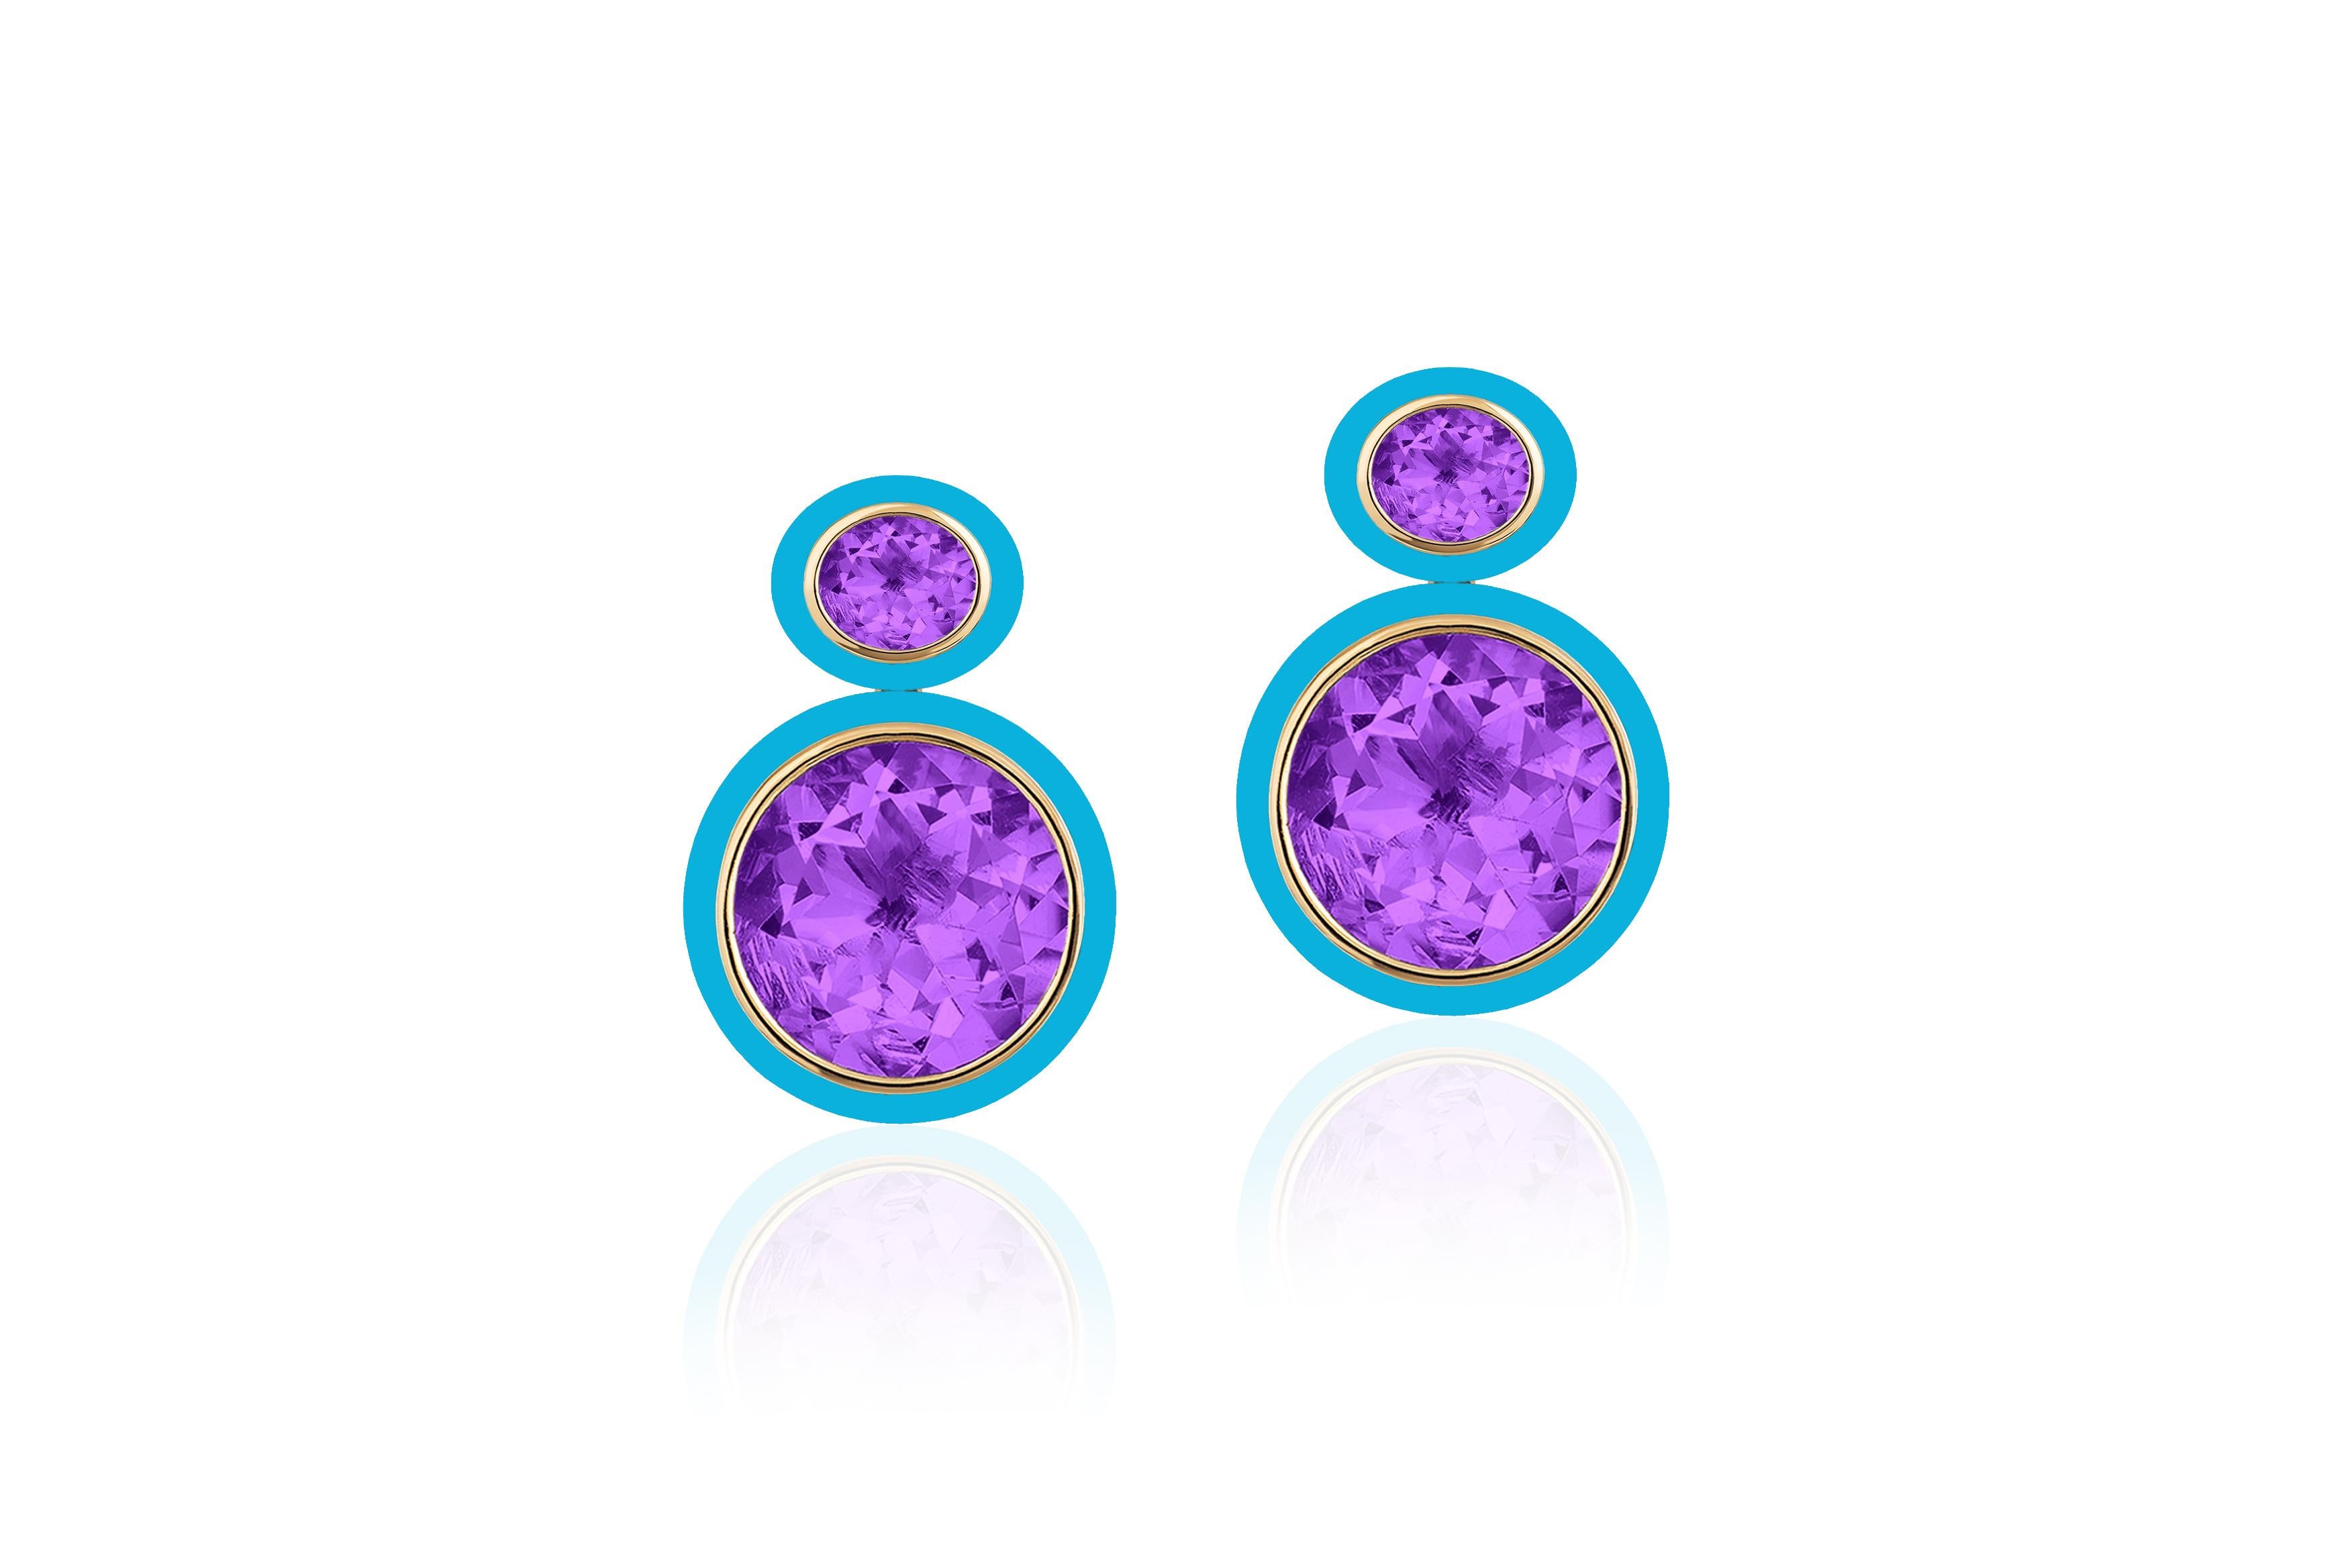 This Oval Shape Amethyst and Turquoise Earrings are a stunning piece from the 'Mélange' Collection. These earrings feature a beautiful combination of oval-shaped amethyst and turquoise gemstones, set in 18K yellow gold. The amethyst and turquoise